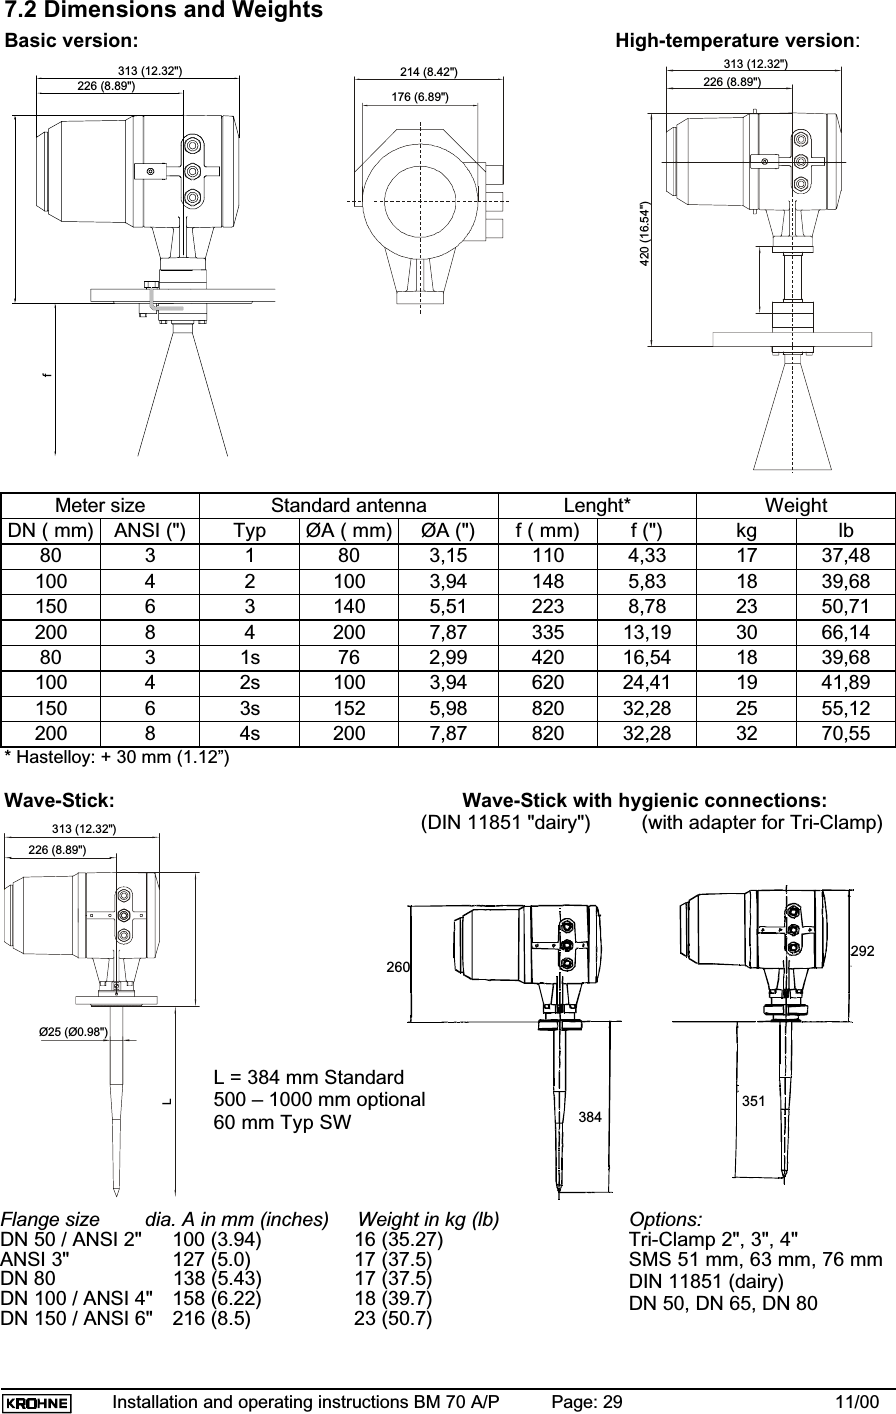 Installation and operating instructions BM 70 A/P Page: 29 11/007.2 Dimensions and WeightsBasic version: High-temperature version:Meter size Standard antenna Lenght* WeightDN ( mm) ANSI (&quot;) Typ ØA ( mm) ØA (&quot;) f ( mm) f (&quot;) kg lb80 3 1 80 3,15 110 4,33 17 37,48100 4 2 100 3,94 148 5,83 18 39,68150 6 3 140 5,51 223 8,78 23 50,71200 8 4 200 7,87 335 13,19 30 66,1480 3 1s 76 2,99 420 16,54 18 39,68100 4 2s 100 3,94 620 24,41 19 41,89150 6 3s 152 5,98 820 32,28 25 55,12200 8 4s 200 7,87 820 32,28 32 70,55* Hastelloy: + 30 mm (1.12”)Wave-Stick: Wave-Stick with hygienic connections:(DIN 11851 &quot;dairy&quot;)         (with adapter for Tri-Clamp)292351384260Options:Tri-Clamp 2&quot;, 3&quot;, 4&quot;SMS 51 mm, 63 mm, 76 mmDIN 11851 (dairy)DN 50, DN 65, DN 80Flange size dia. A in mm (inches)  Weight in kg (lb)DN 50 / ANSI 2&quot; 100 (3.94)      16 (35.27)ANSI 3&quot; 127 (5.0)      17 (37.5)DN 80 138 (5.43)      17 (37.5)DN 100 / ANSI 4&quot; 158 (6.22)      18 (39.7)DN 150 / ANSI 6&quot; 216 (8.5)     23 (50.7)214 (8.42&quot;)176 (6.89&quot;)313 (12.32&quot;)226 (8.89&quot;)313 (12.32&quot;)226 (8.89&quot;)420 (16.54&quot;)fL313 (12.32&quot;)226 (8.89&quot;)Ø25 (Ø0.98&quot;)L = 384 mm Standard500 – 1000 mm optional60 mm Typ SW